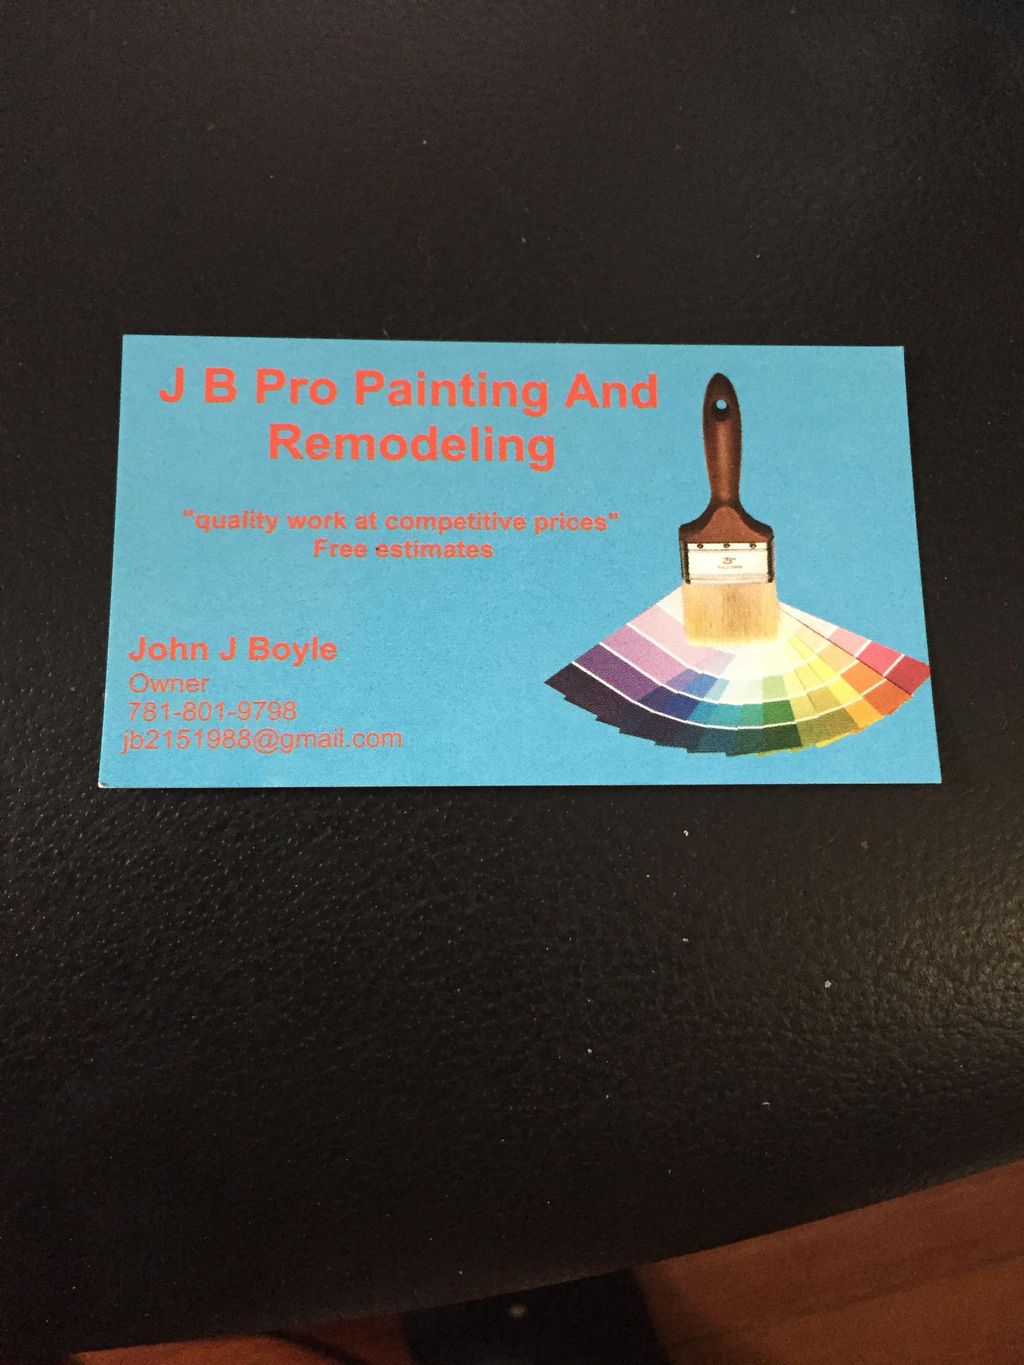 JB Pro Painting And Remodeling